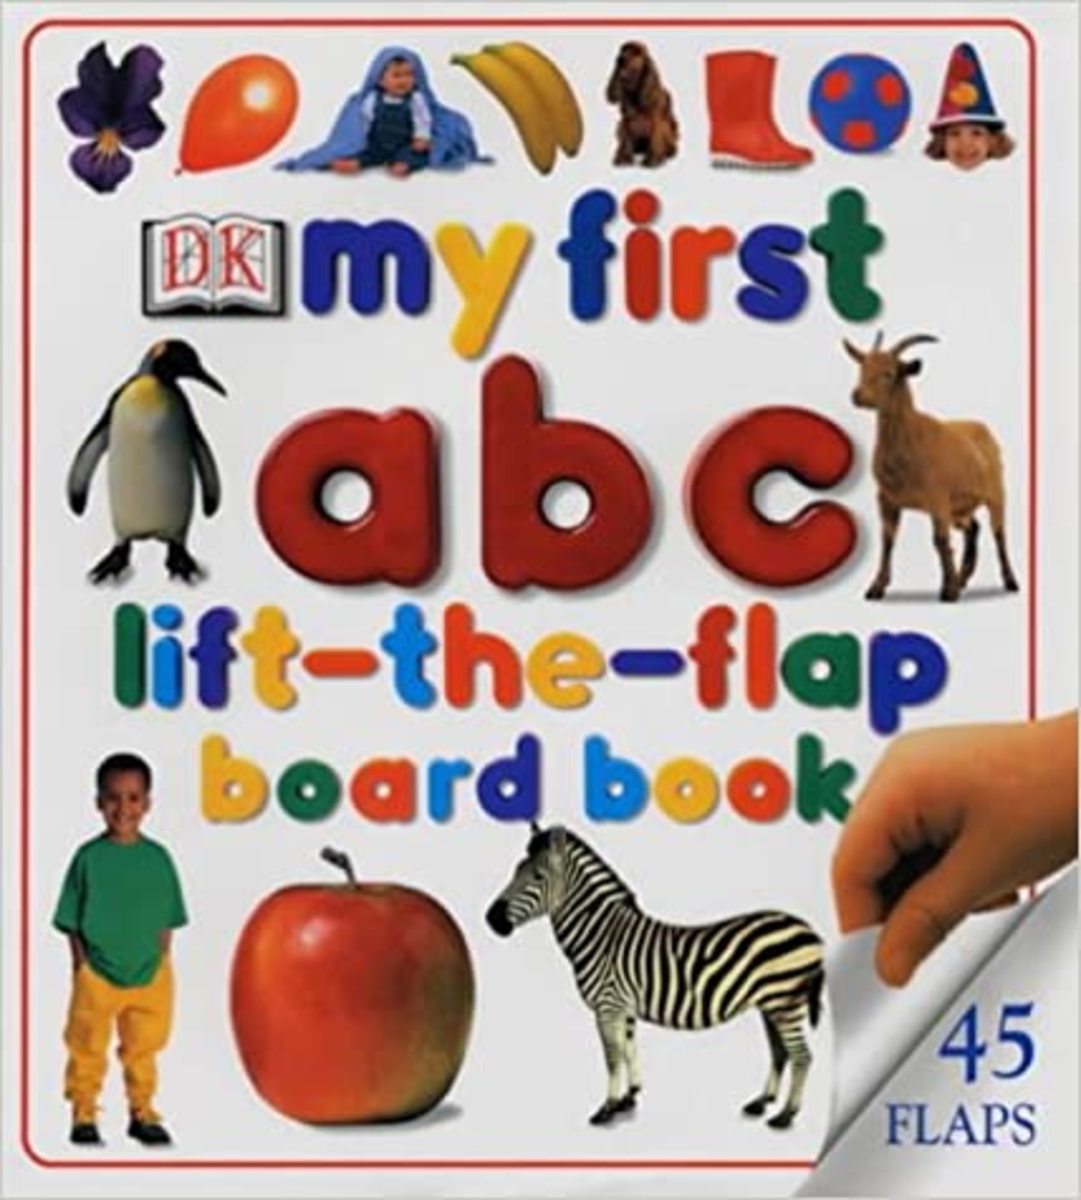 "My First ABC Lift-The-Flap Board Book" cover